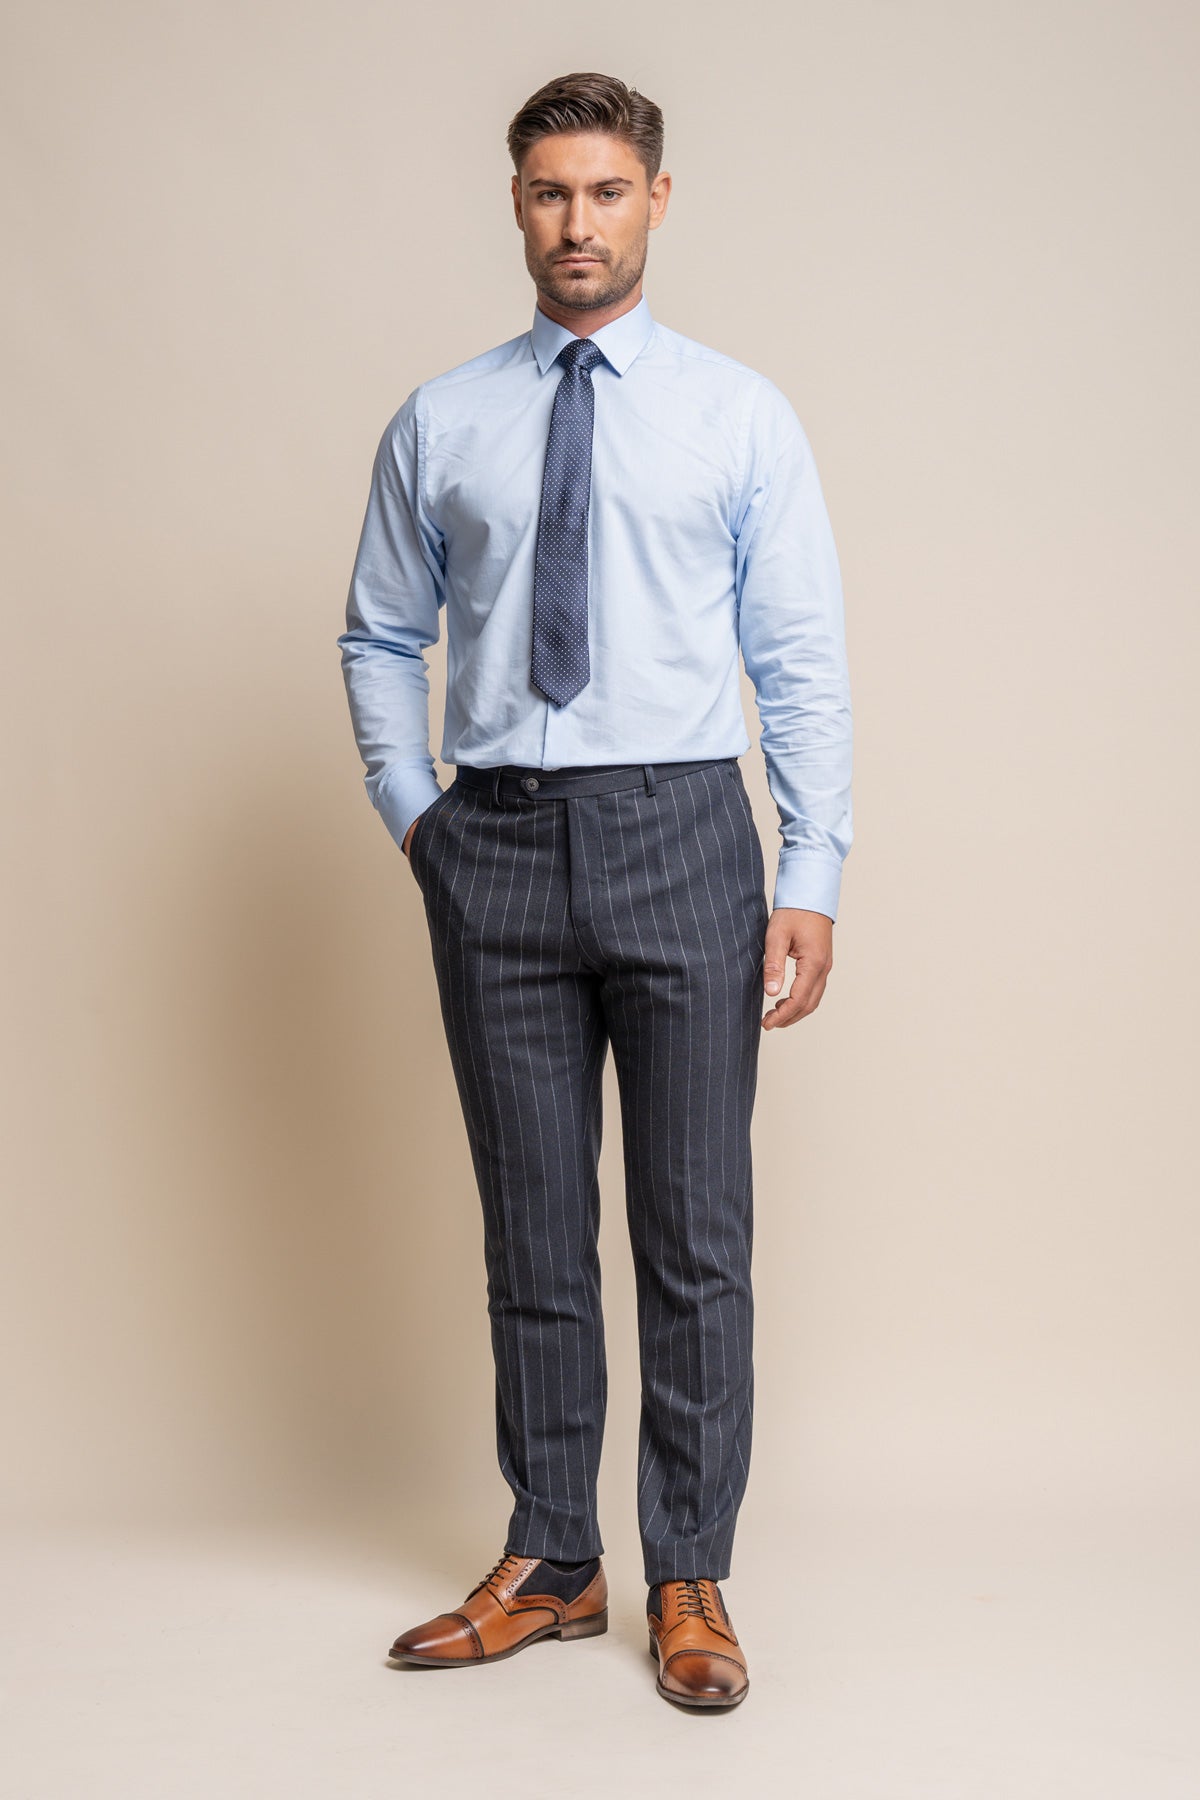 Invincible Navy Pinstripe Trousers - Trousers - 28R - Swagger & Swoon